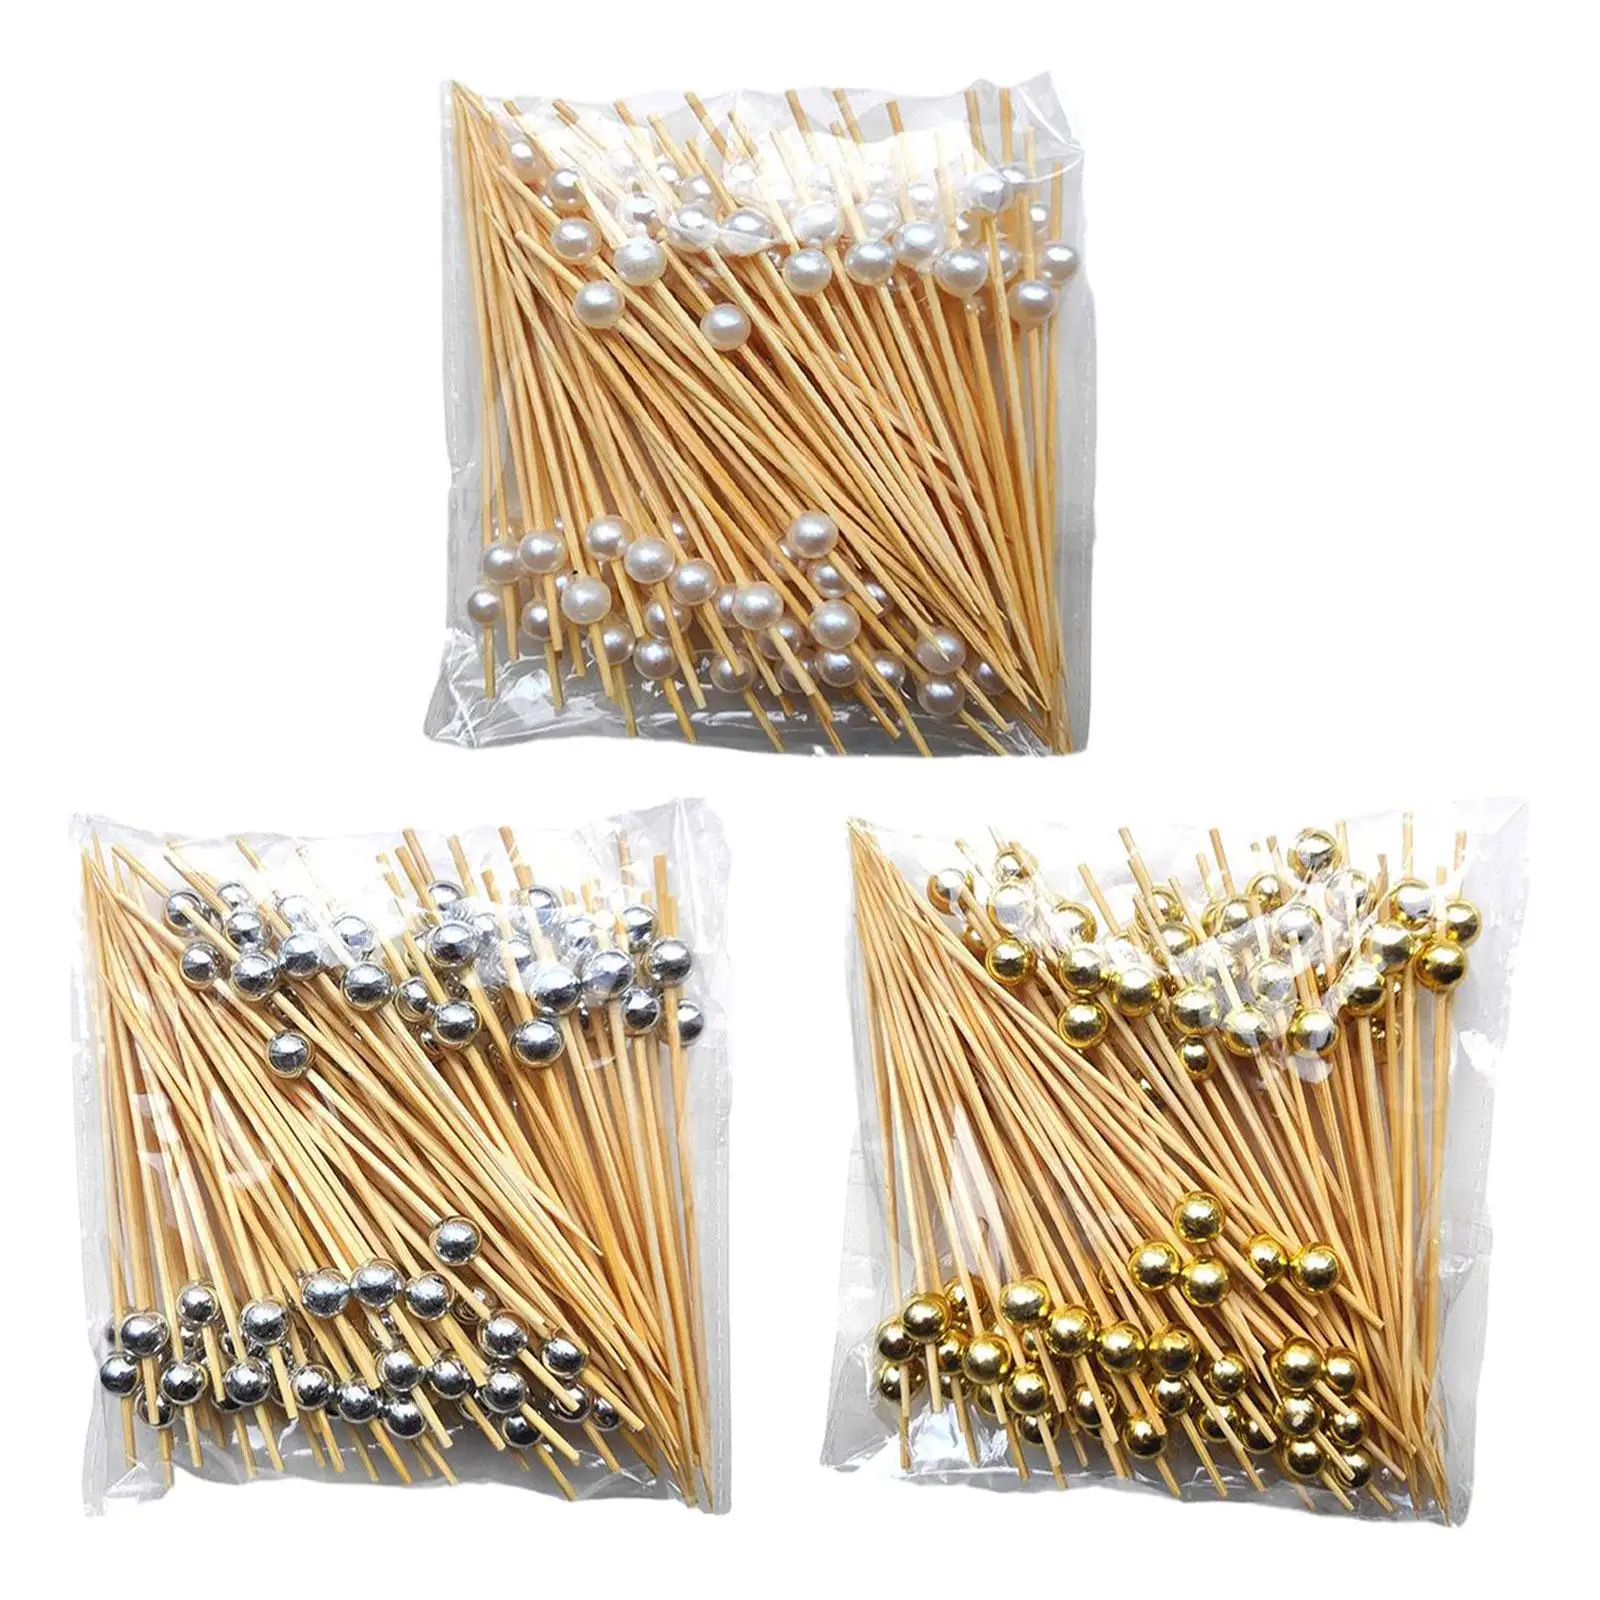 300 Pieces Bamboo Skewers Decorative Wood Frill Picks Cocktail Sticks for Appetizer Wedding Party Supplies Sandwich Holiday